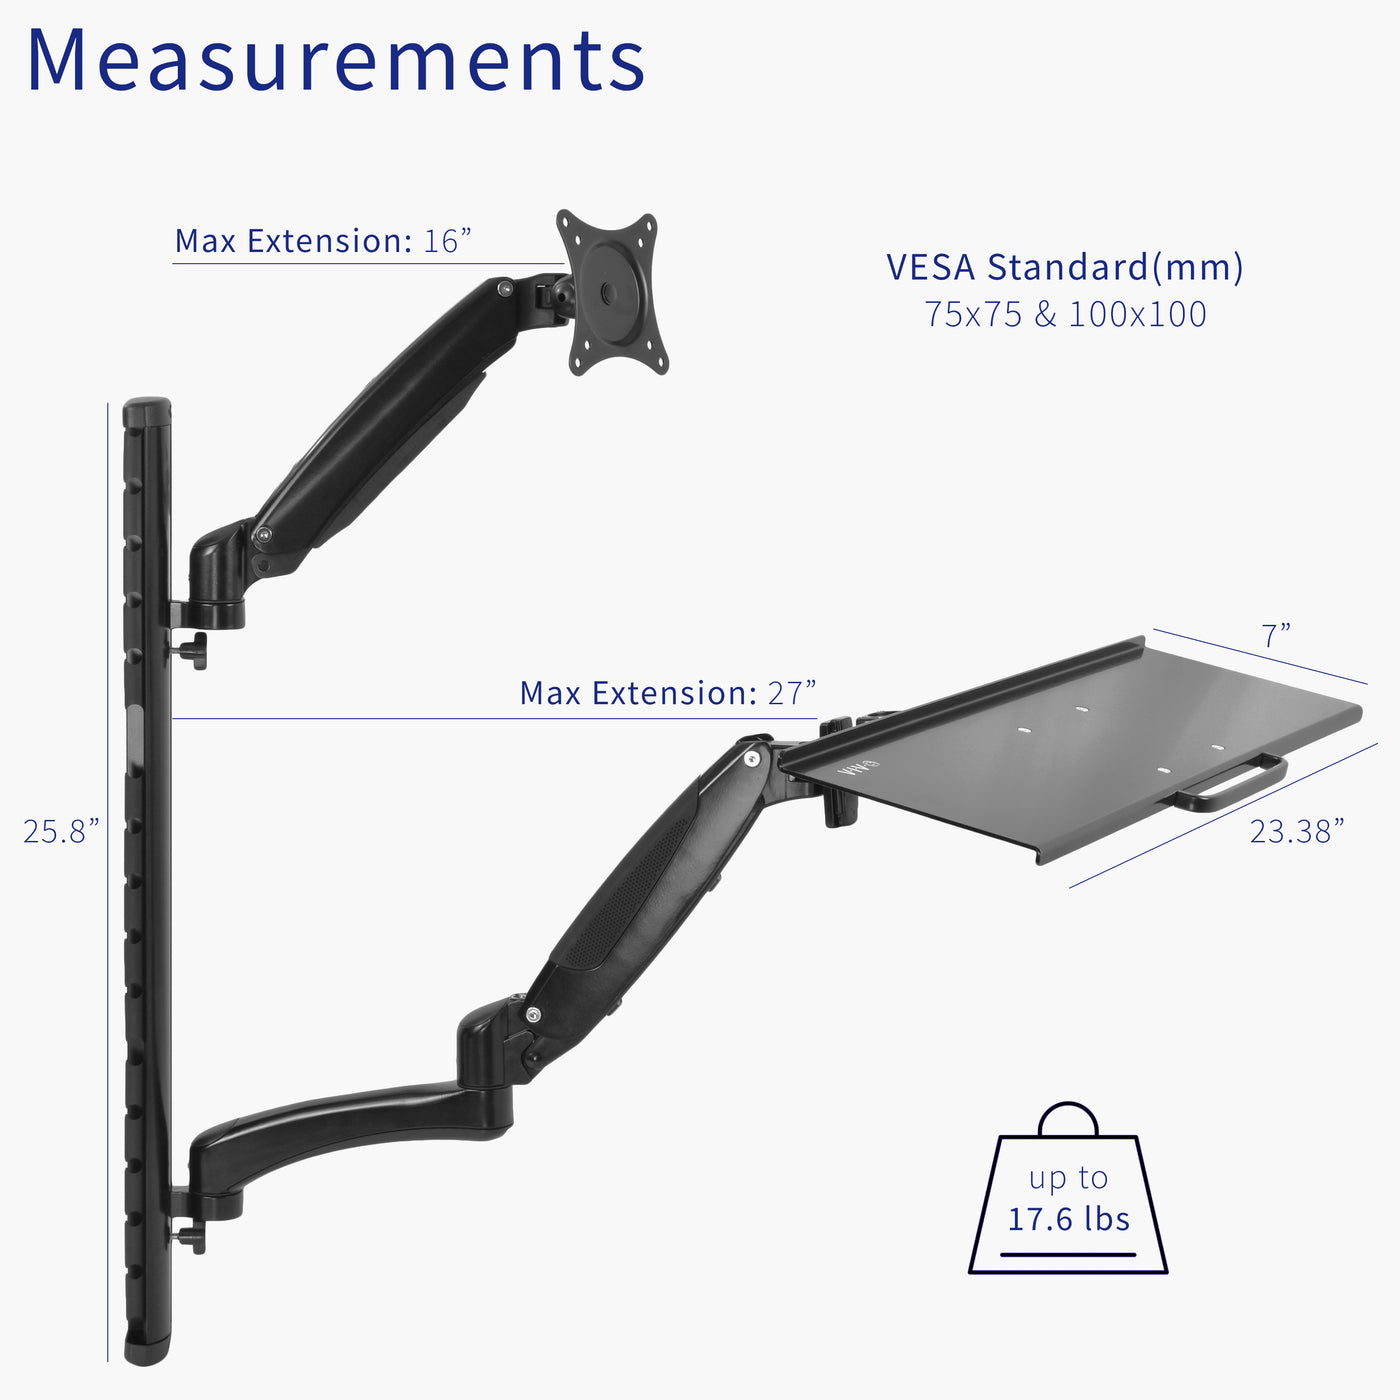 Measurements and specifications of a wall mounting monitor mount and keyboard tray. 